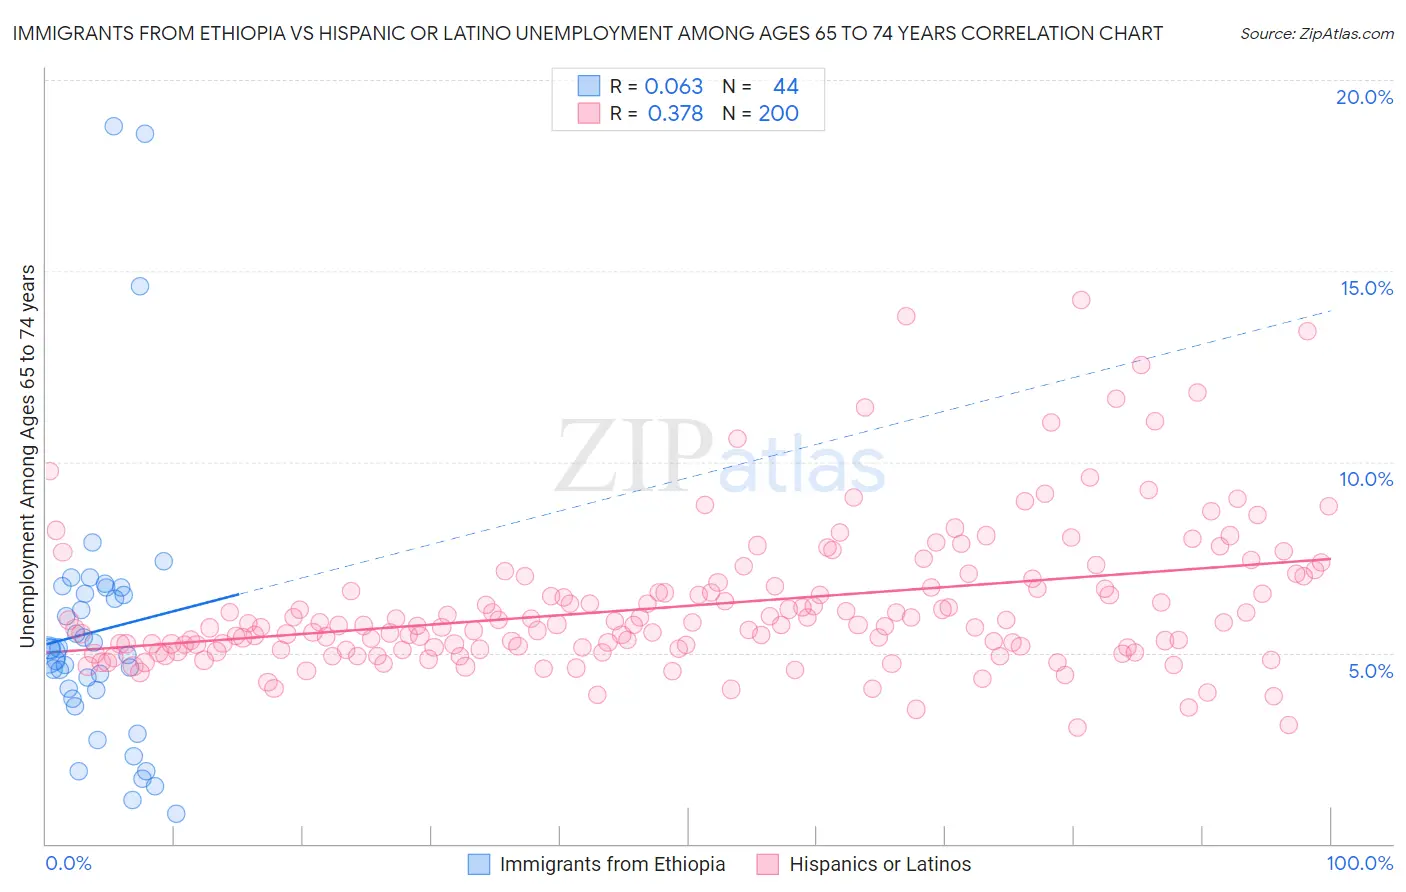 Immigrants from Ethiopia vs Hispanic or Latino Unemployment Among Ages 65 to 74 years